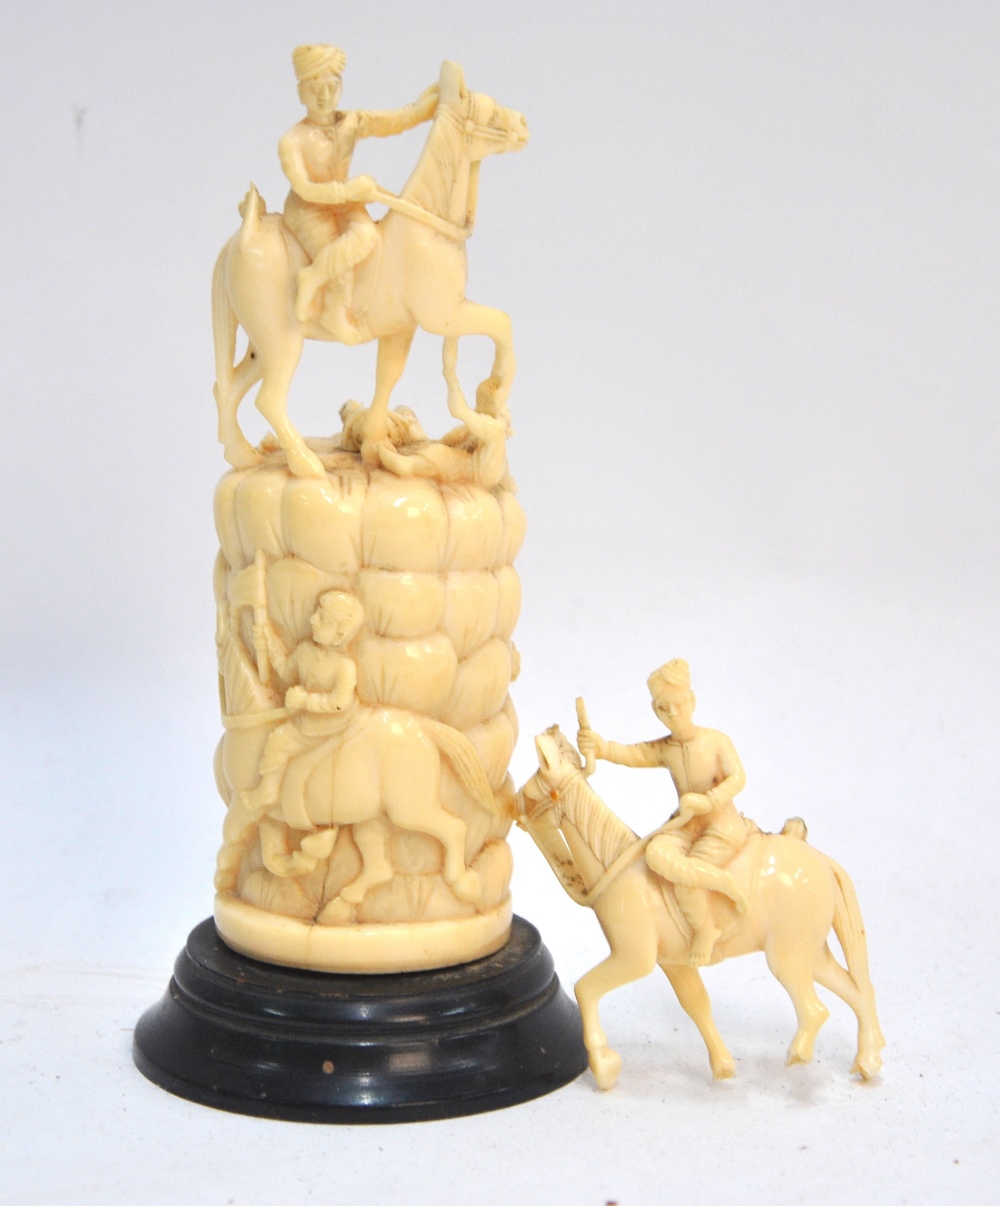 An Indian ivory sculpture, designed with